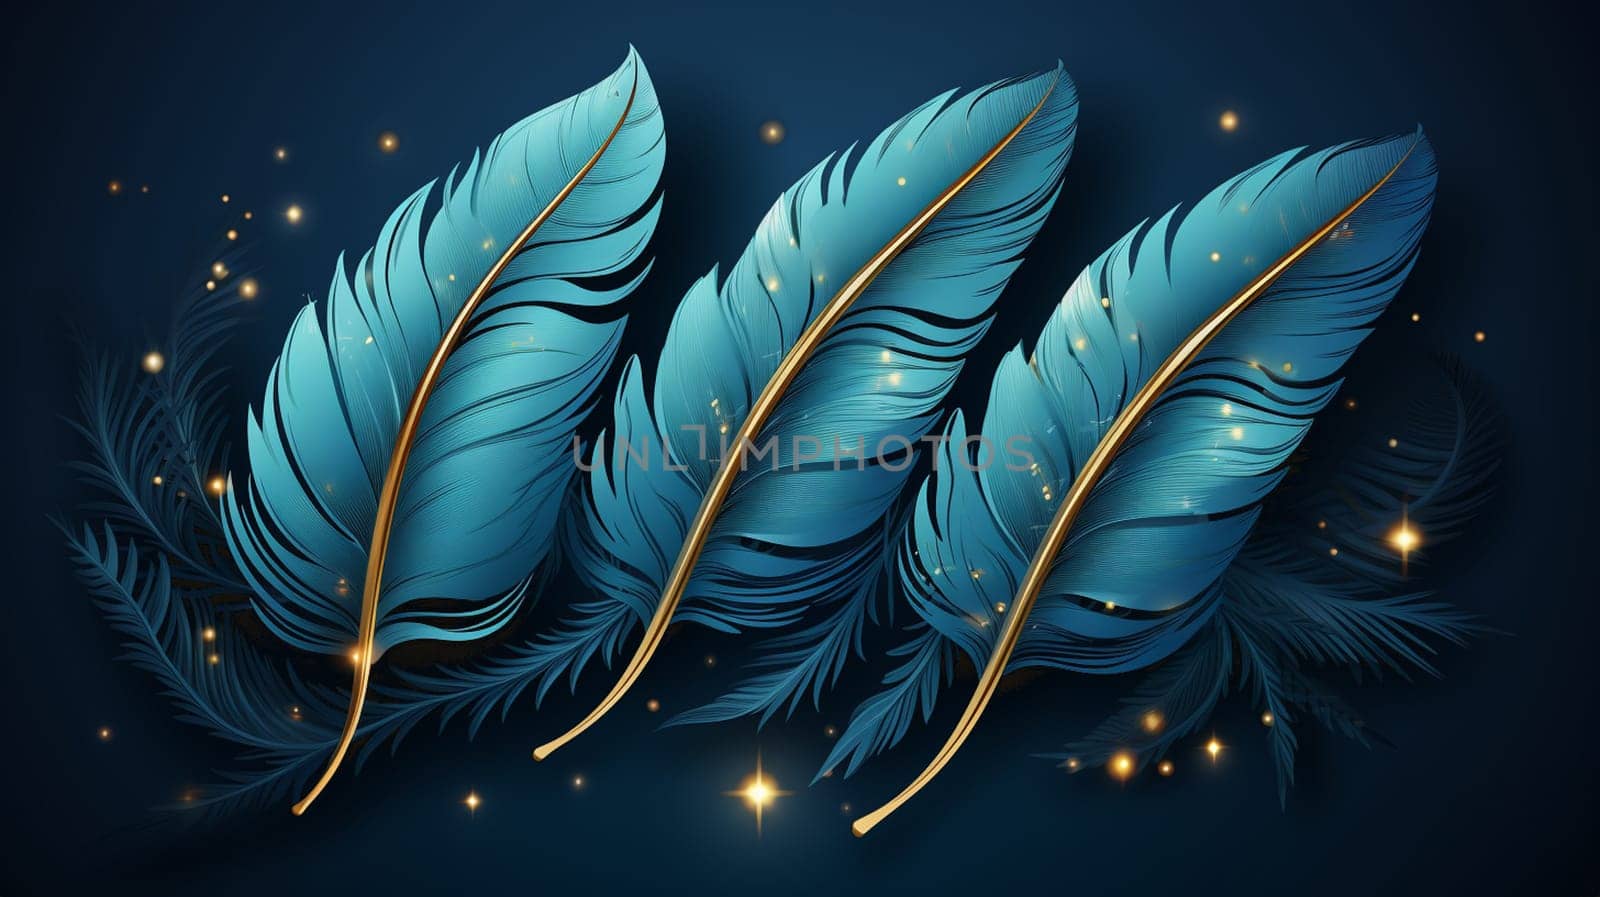 Background with feathers of pastel colors. Digital illustration by Andelov13